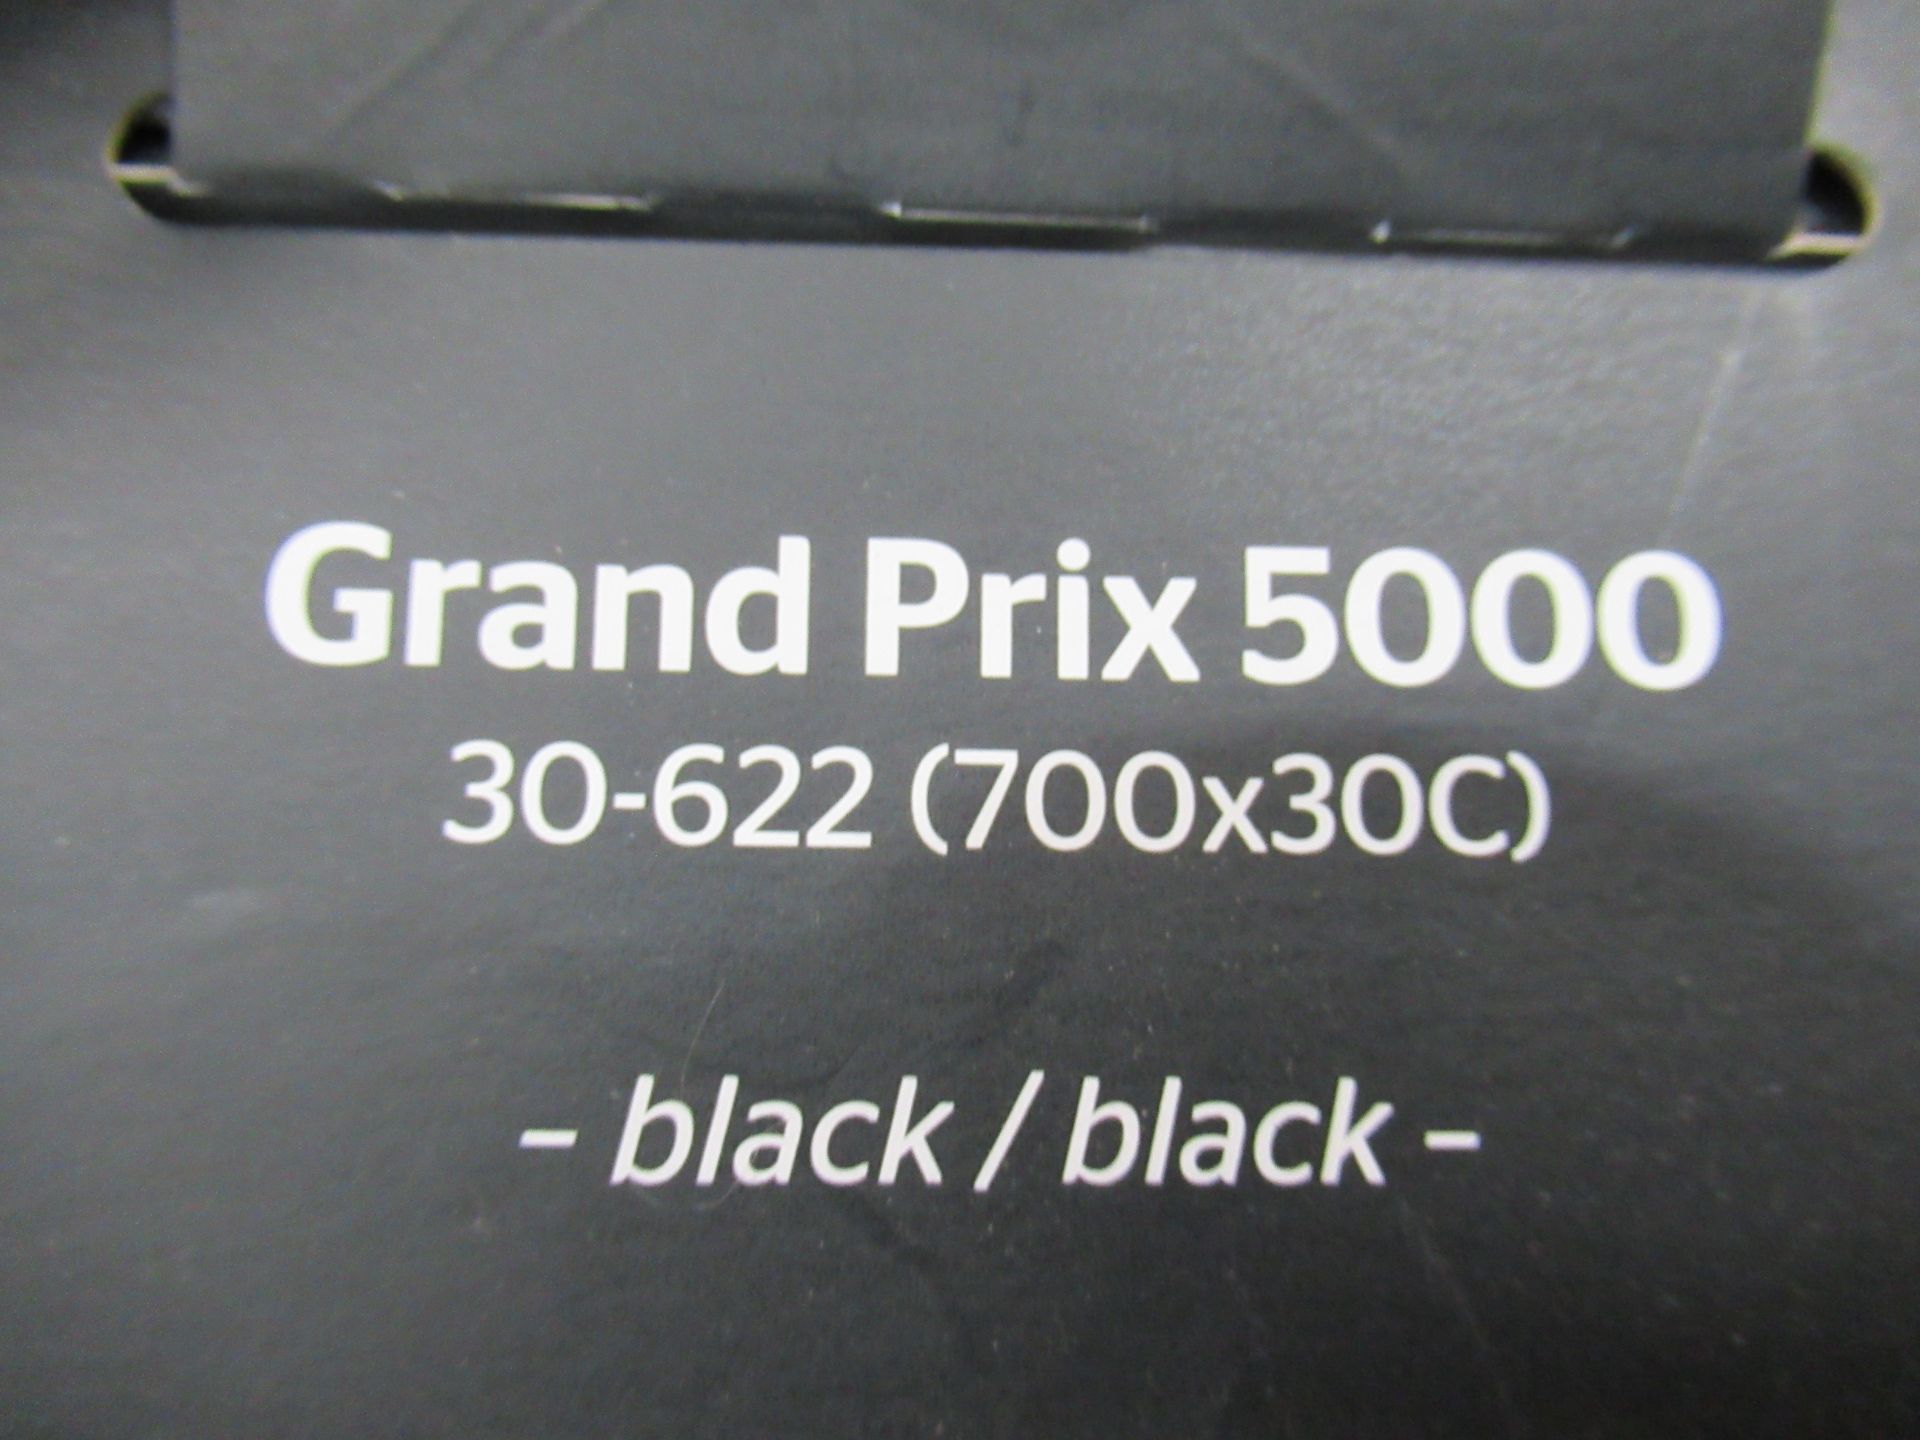 3 x Continental Grand Prix 5000 tyres - 1 x 700x25c; 1 x 700x28c and 1 x 700 x 30c (total RRP£239.85 - Image 4 of 4